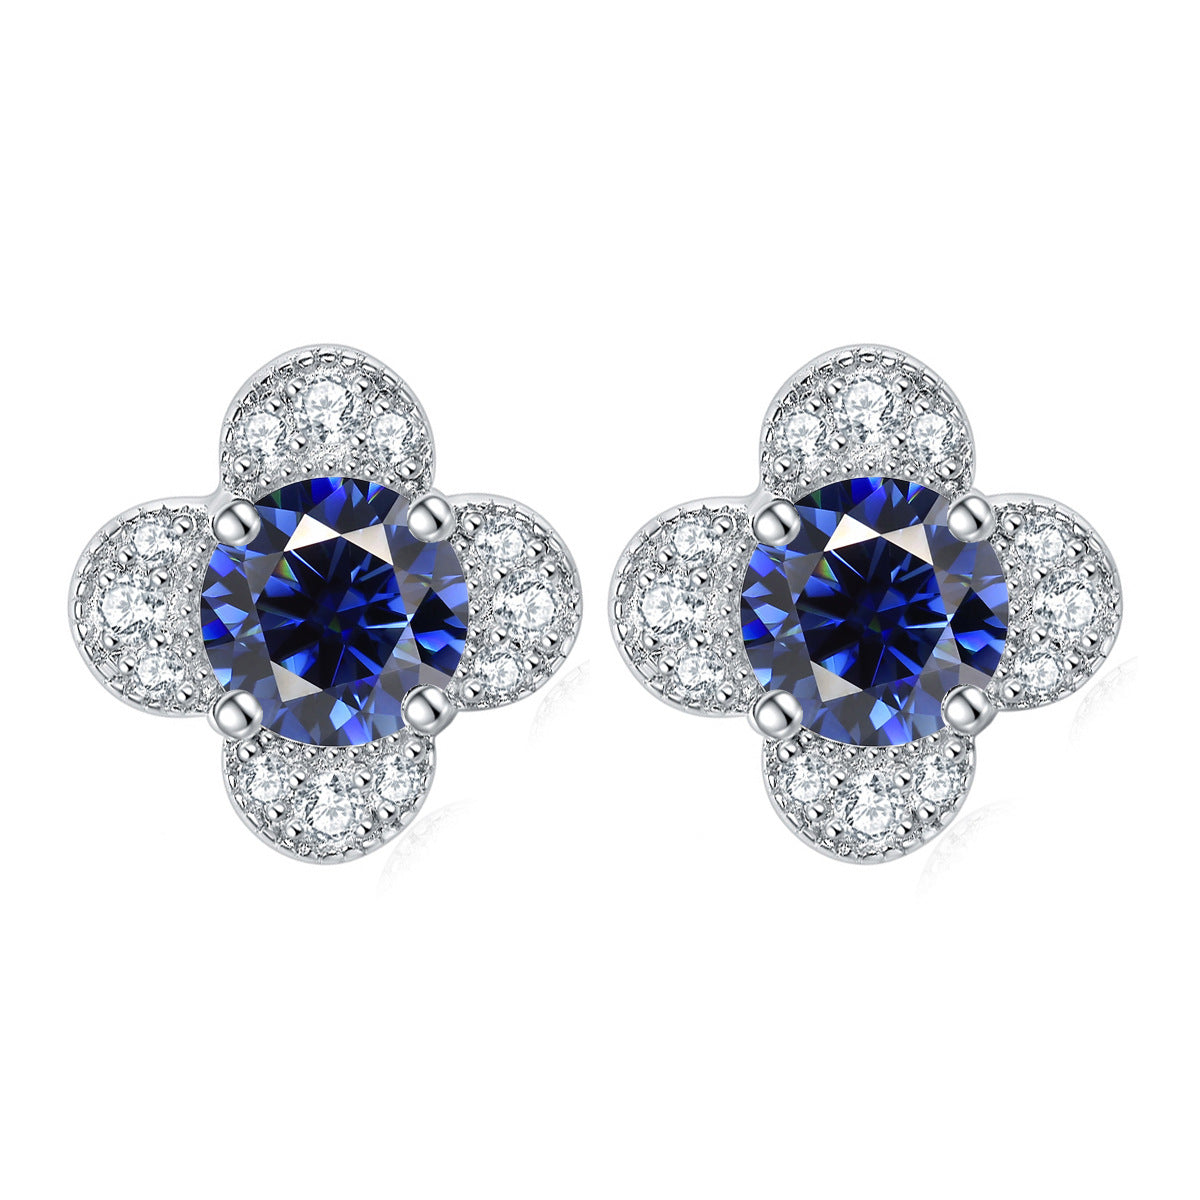 Colourful Round Zircon Clover Silver Studs Earrings for Women